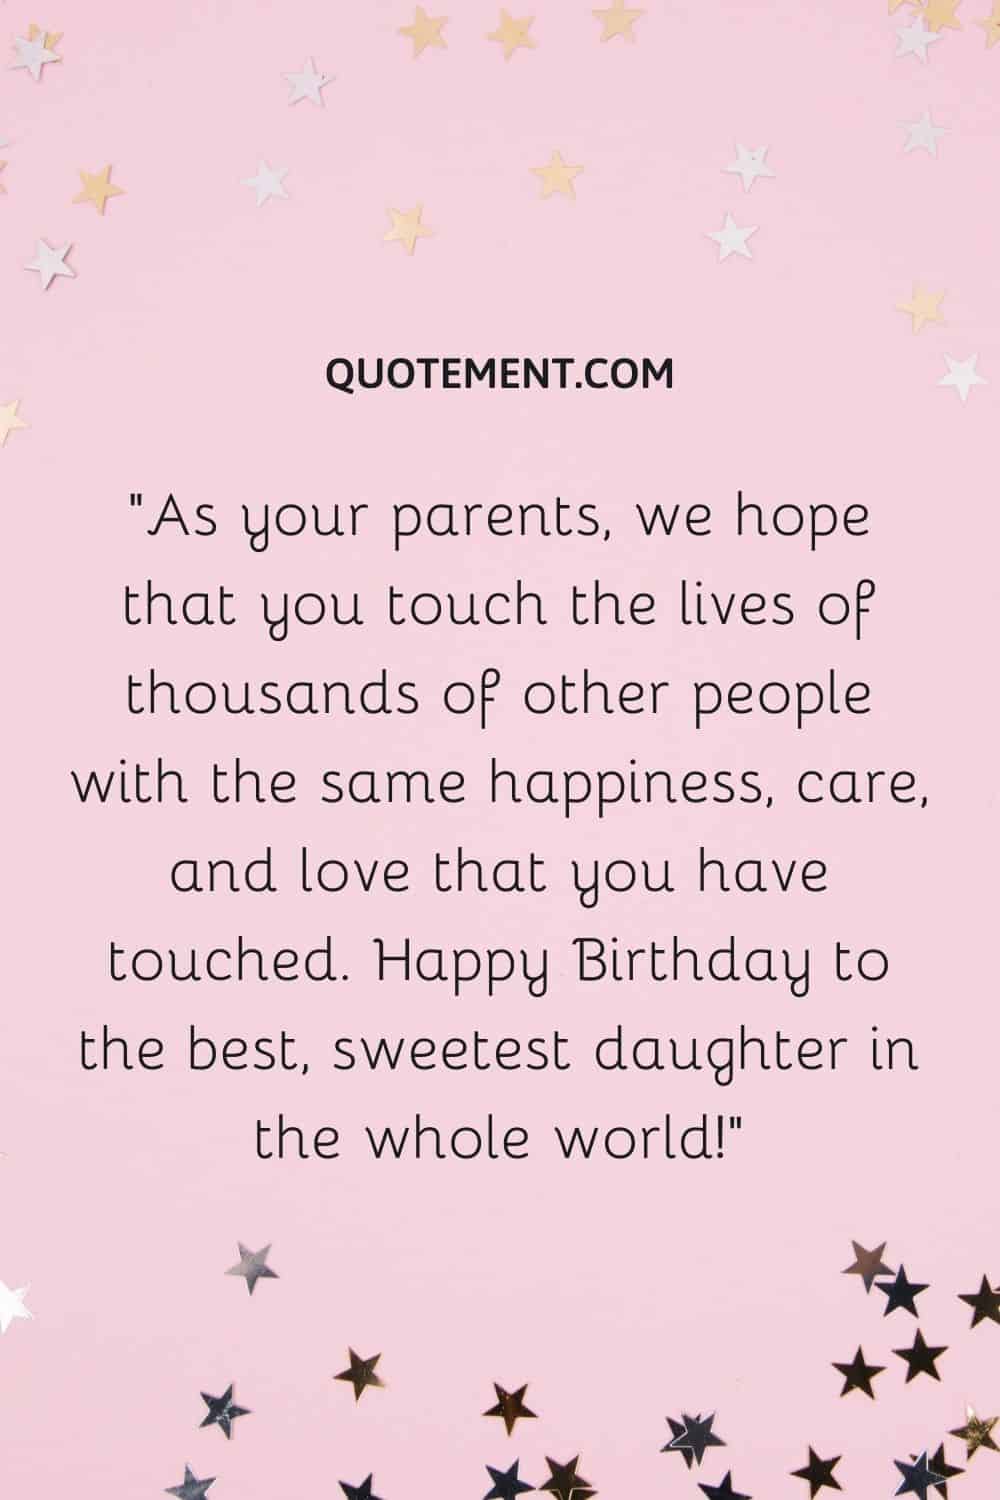 As your parents, we hope that you touch the lives of thousands of other people